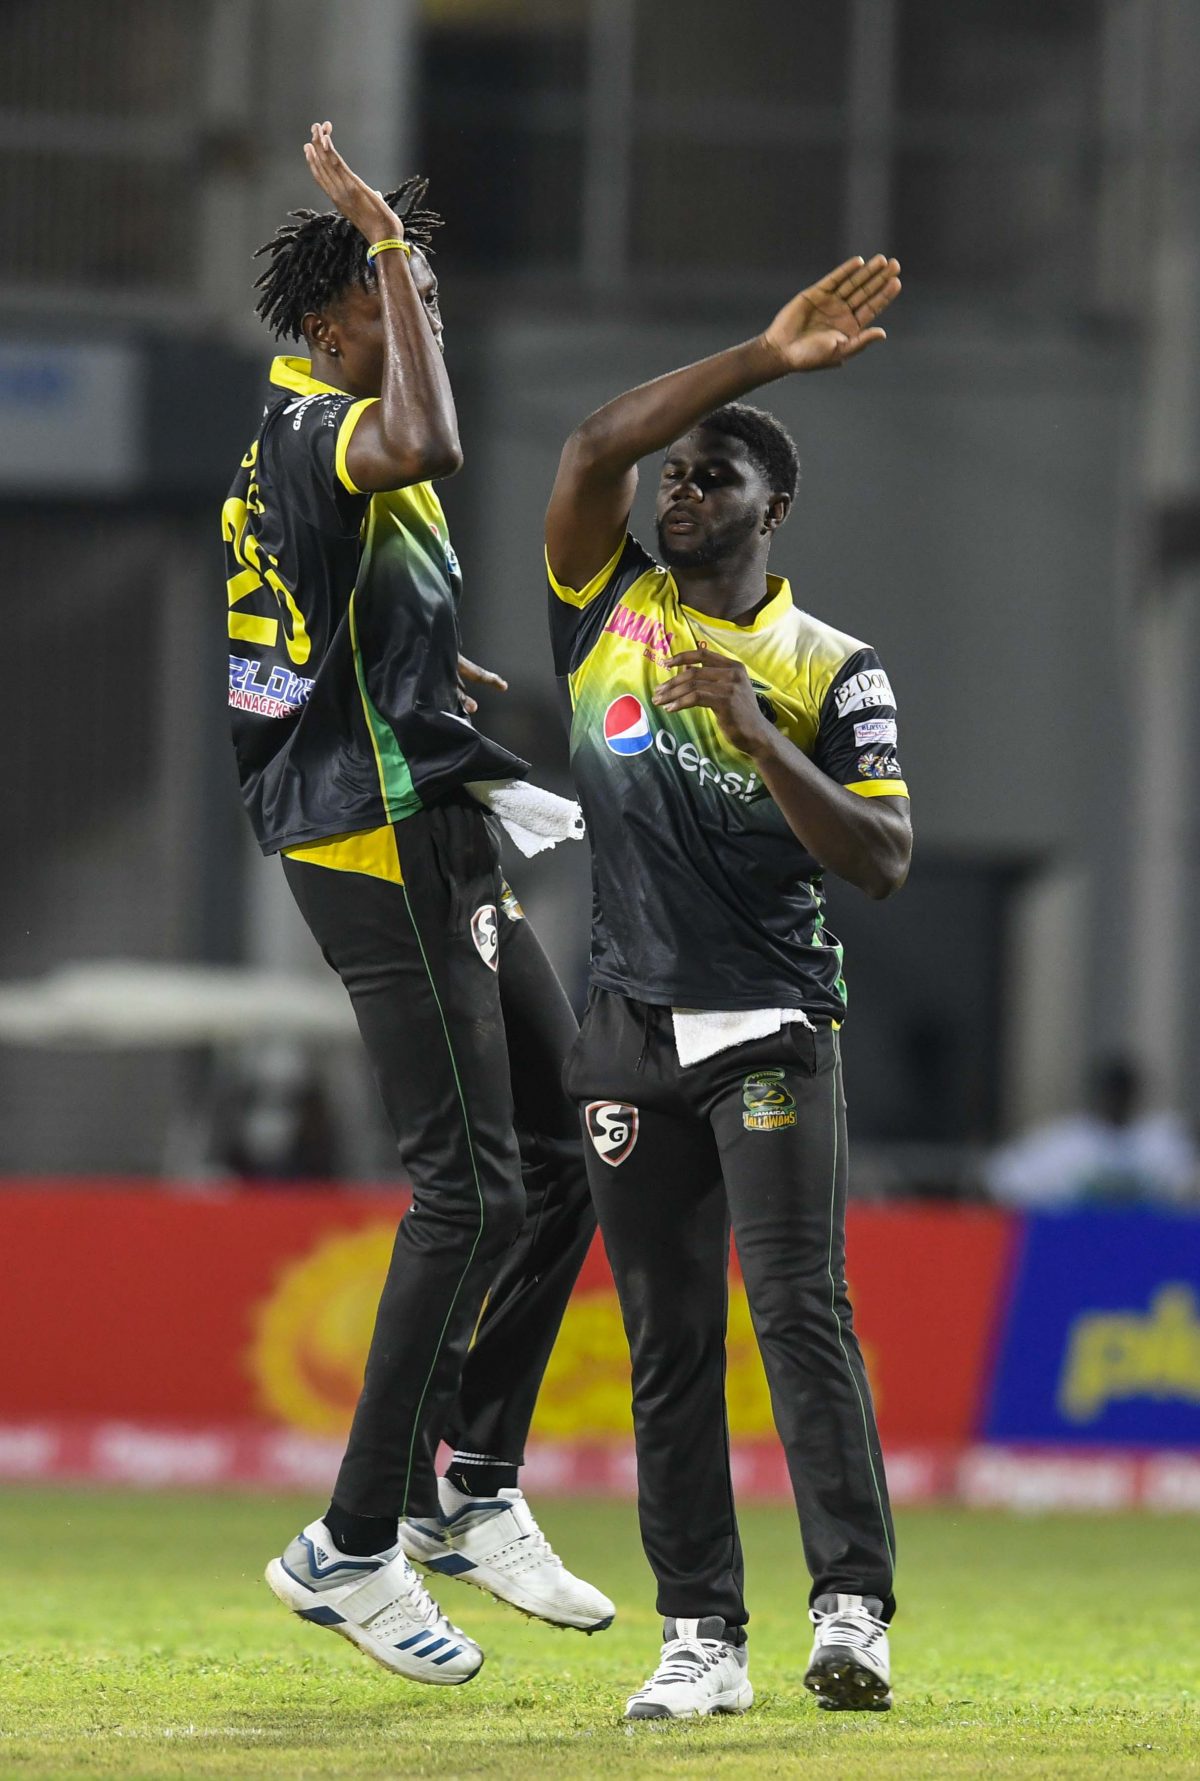 In this handout image provided by CPL T20, Ramaal Lewis (R) and Shamar Springer (L) of Jamaica Tallawahs celebrates the dismissal of John Campbell of St Lucia Zouks (not in frame) during match 9 of the Hero Caribbean Premier League between Jamaica Tallawahs and St Lucia Zouks at Sabina Park on September 12, 2019 in Kingston, Jamaica. (Photo by Randy Brooks - CPL T20/Getty Images)